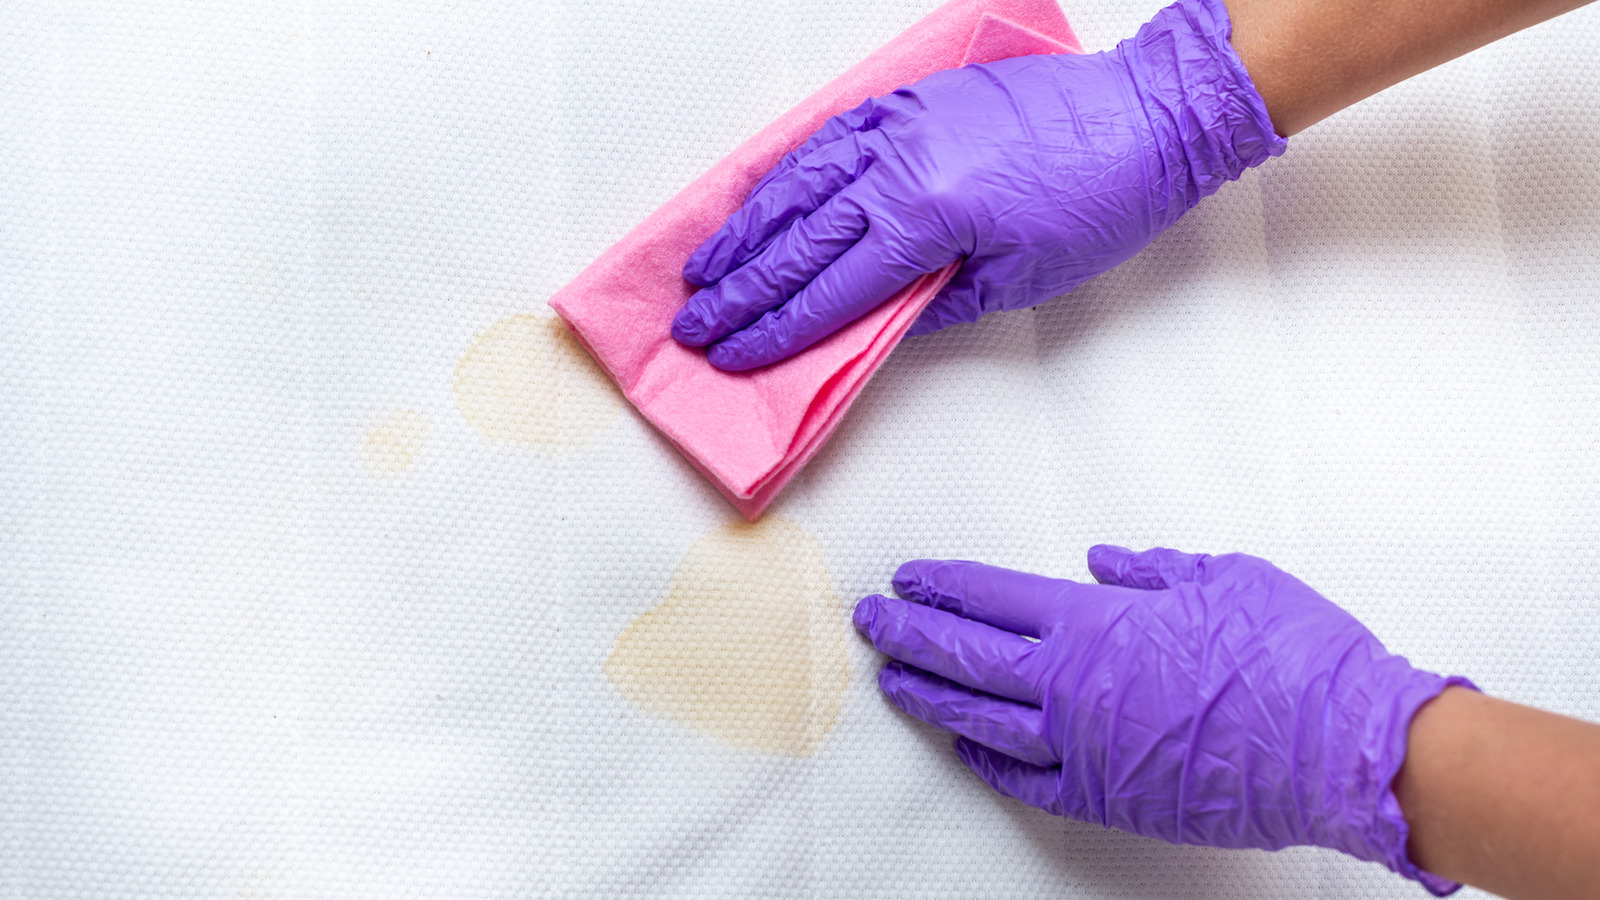 can yellow mattress stains hurt you